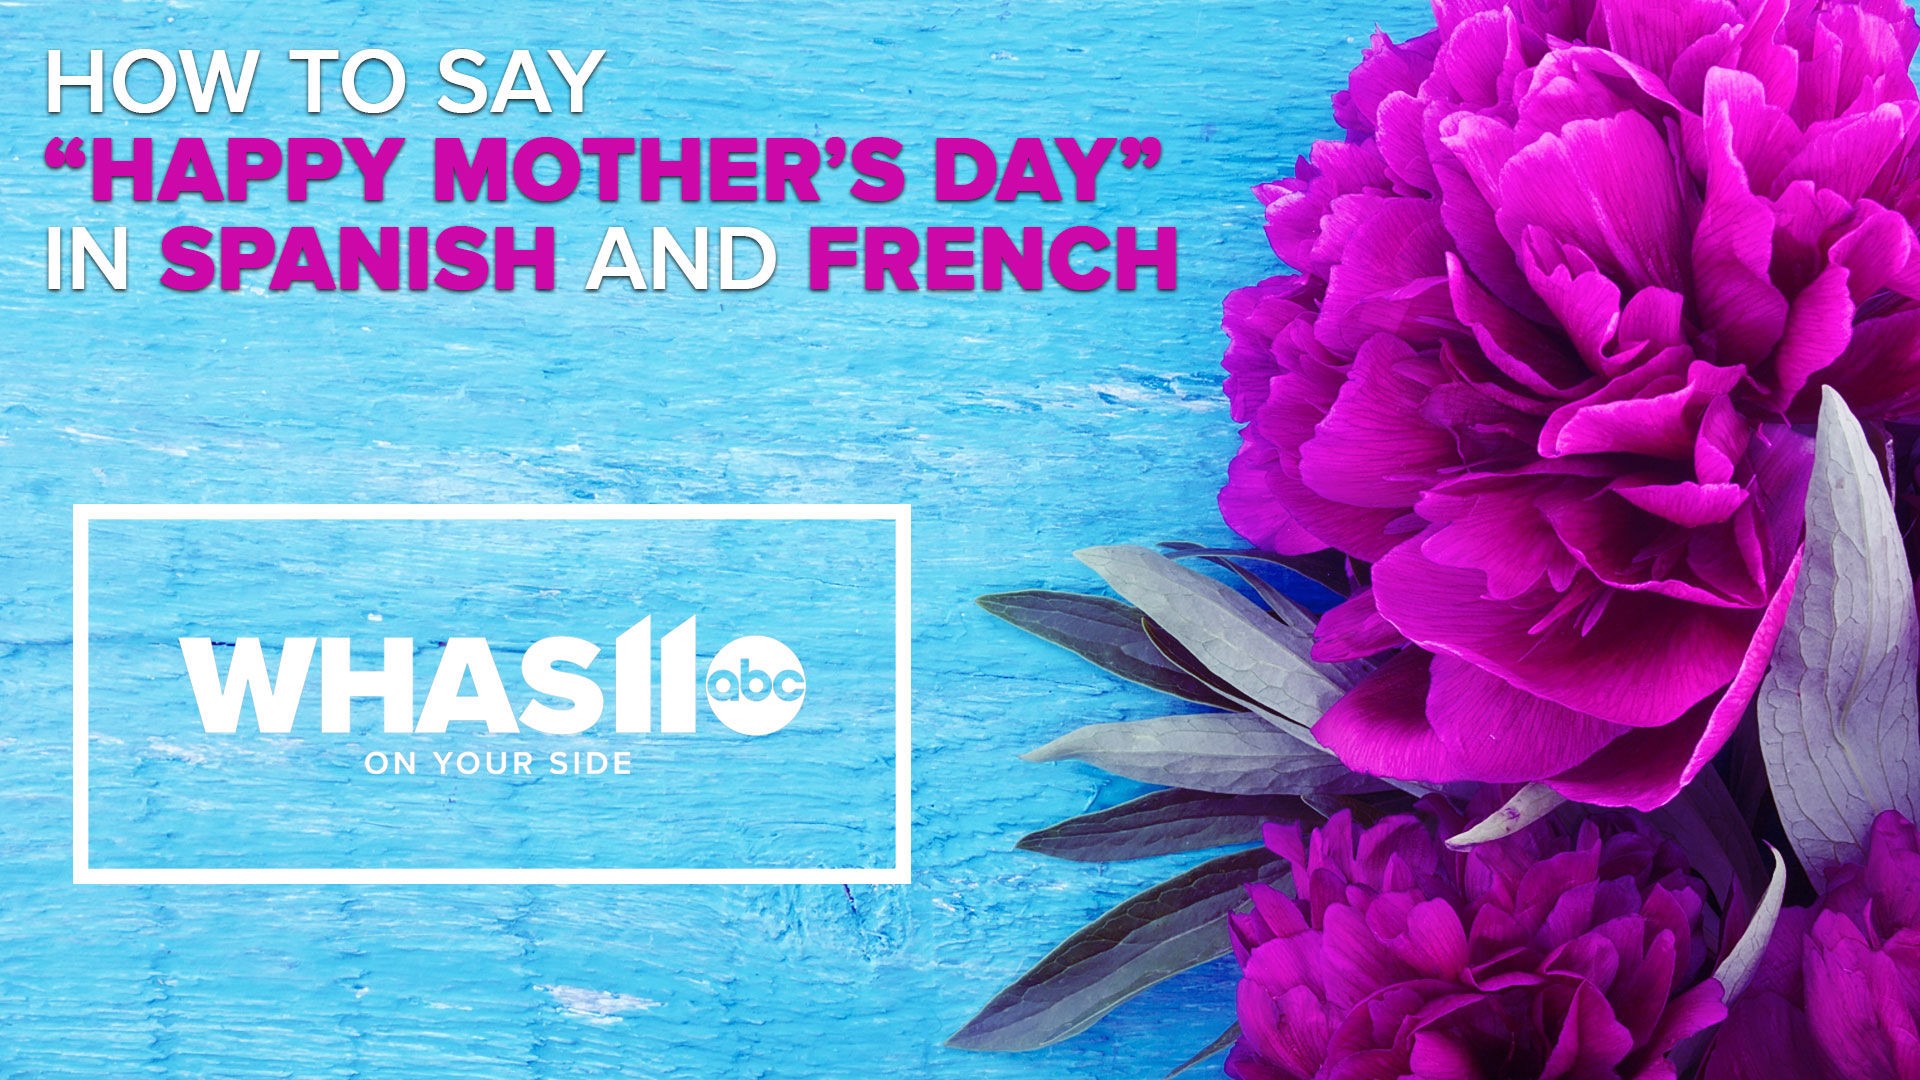 Google Trends is showing that people have been searching for how to say Happy Mother's Day in Spanish. So, we got our very own Allison Ibrahim to help us out and give you a little tutorial.